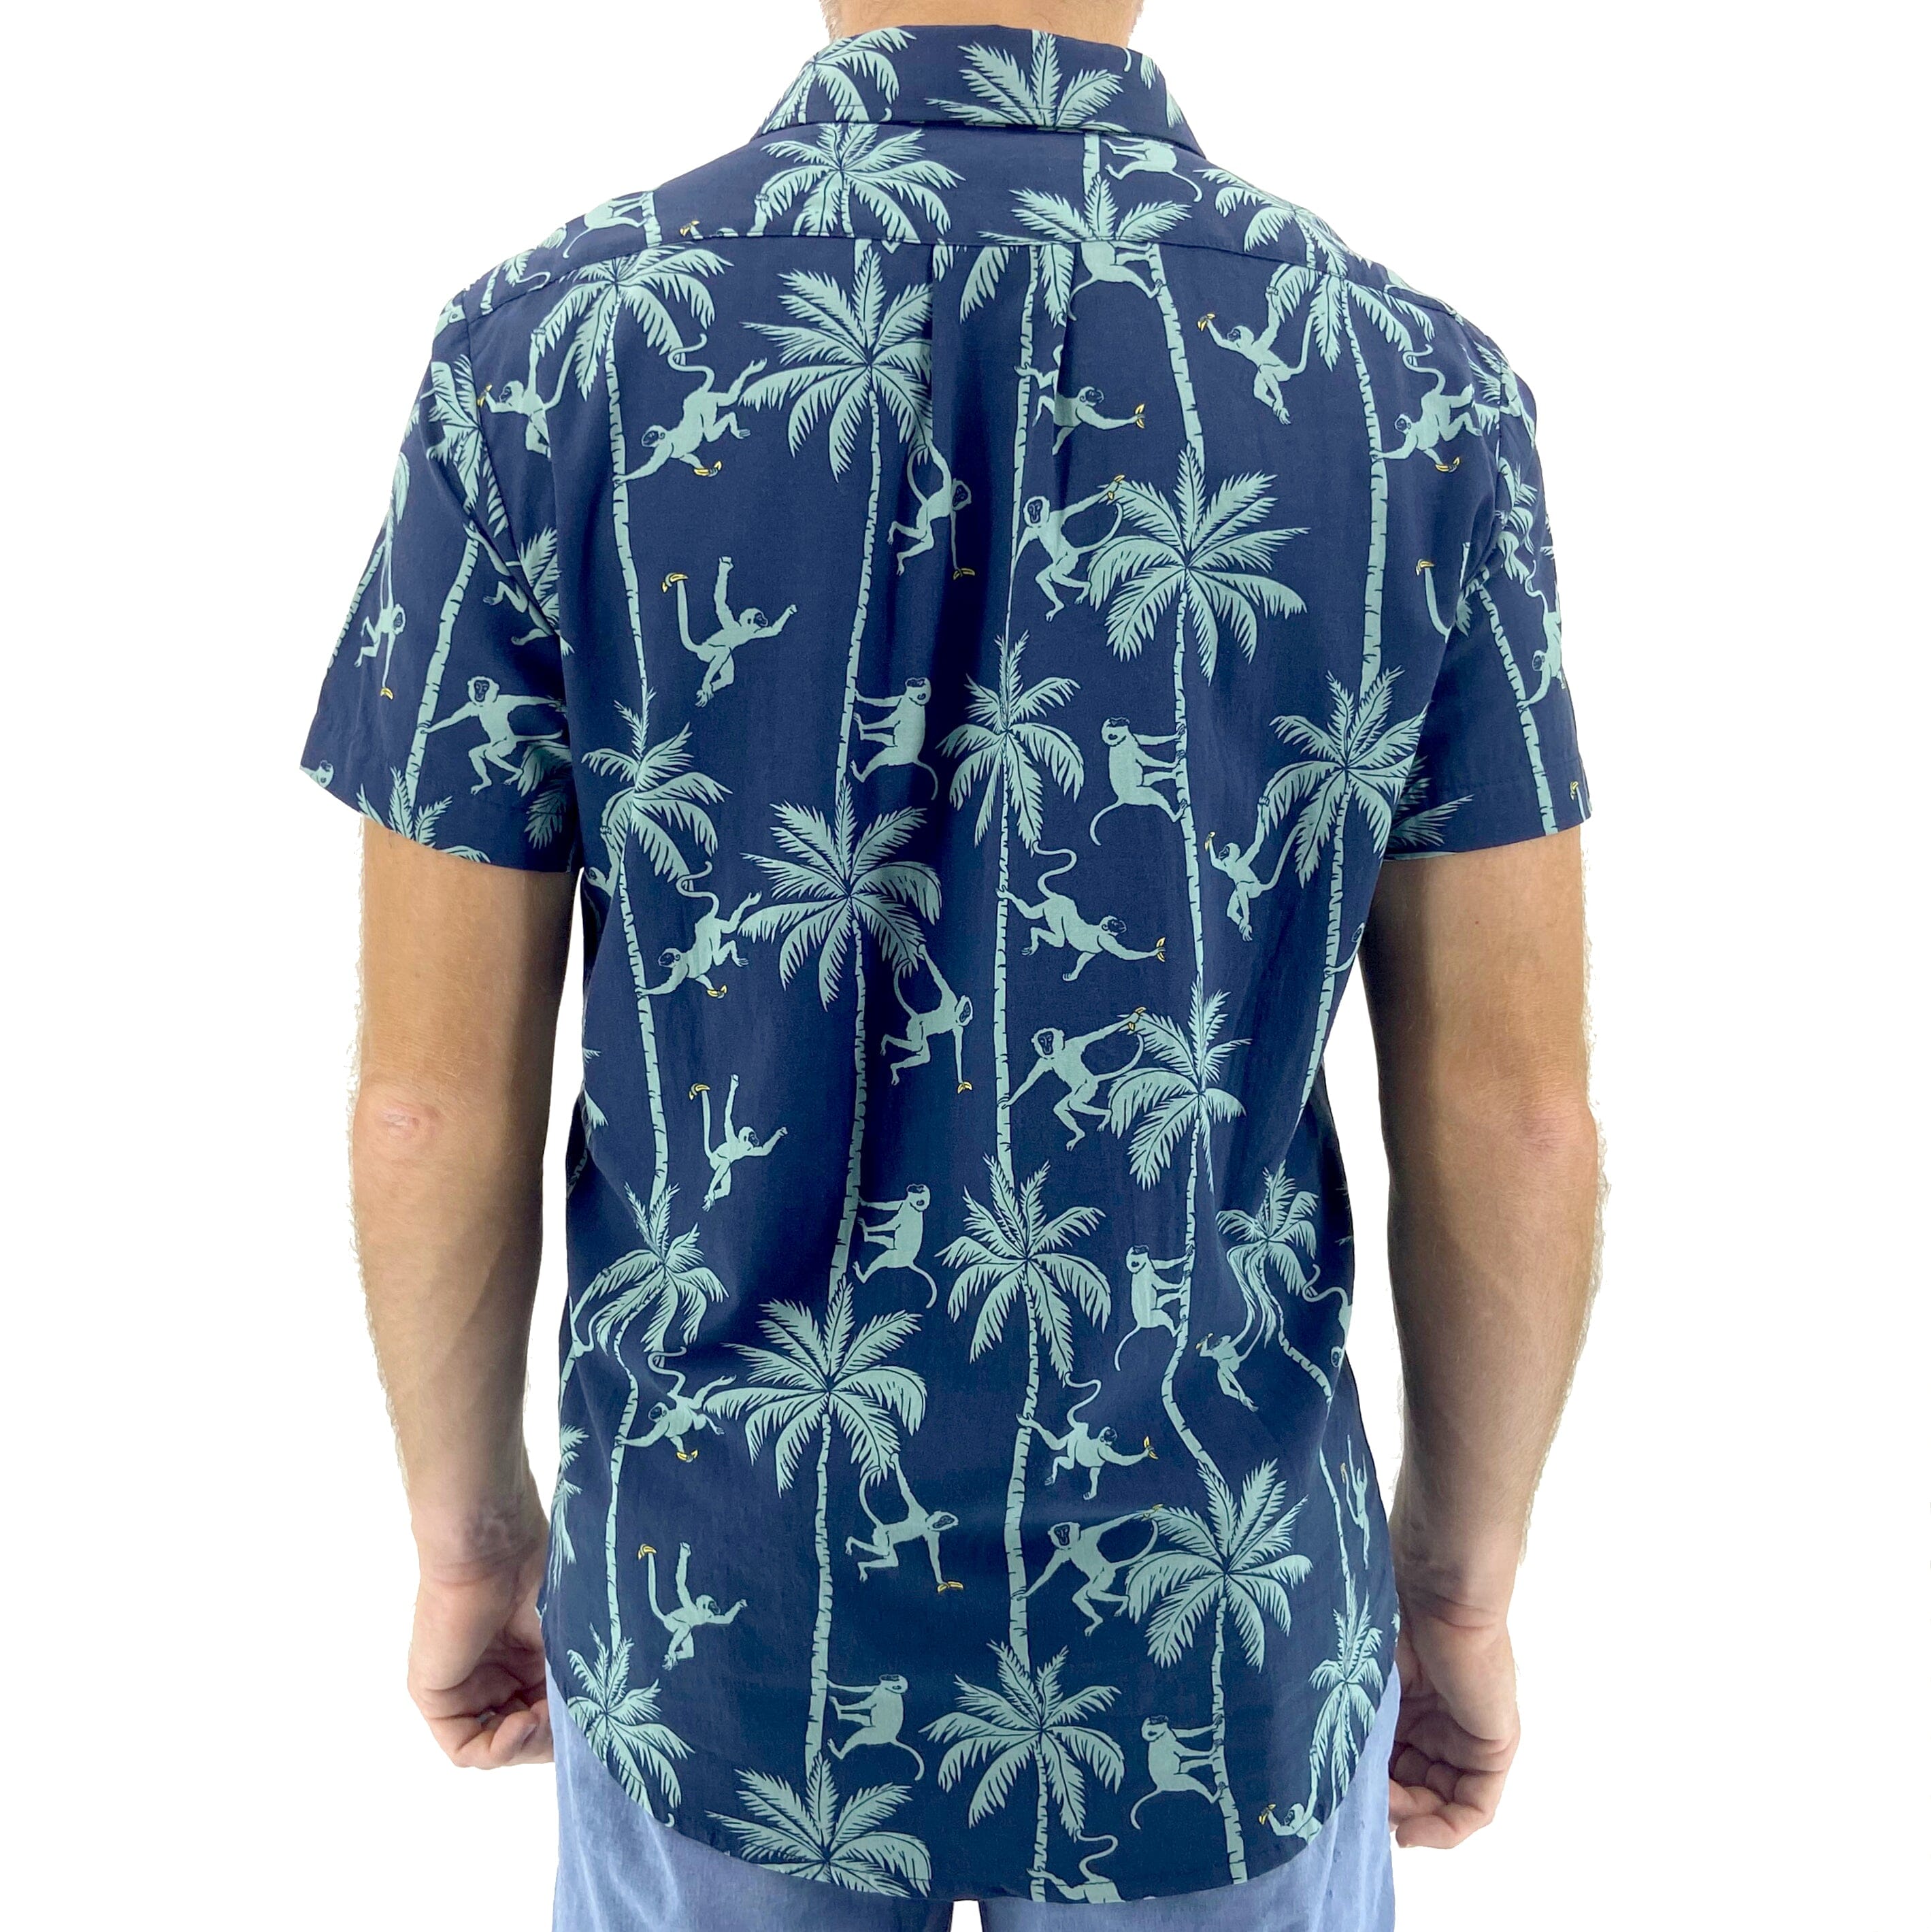 Buy Men's Short Sleeve Button Down Hawaiian Shirts with Monkey All Over Print